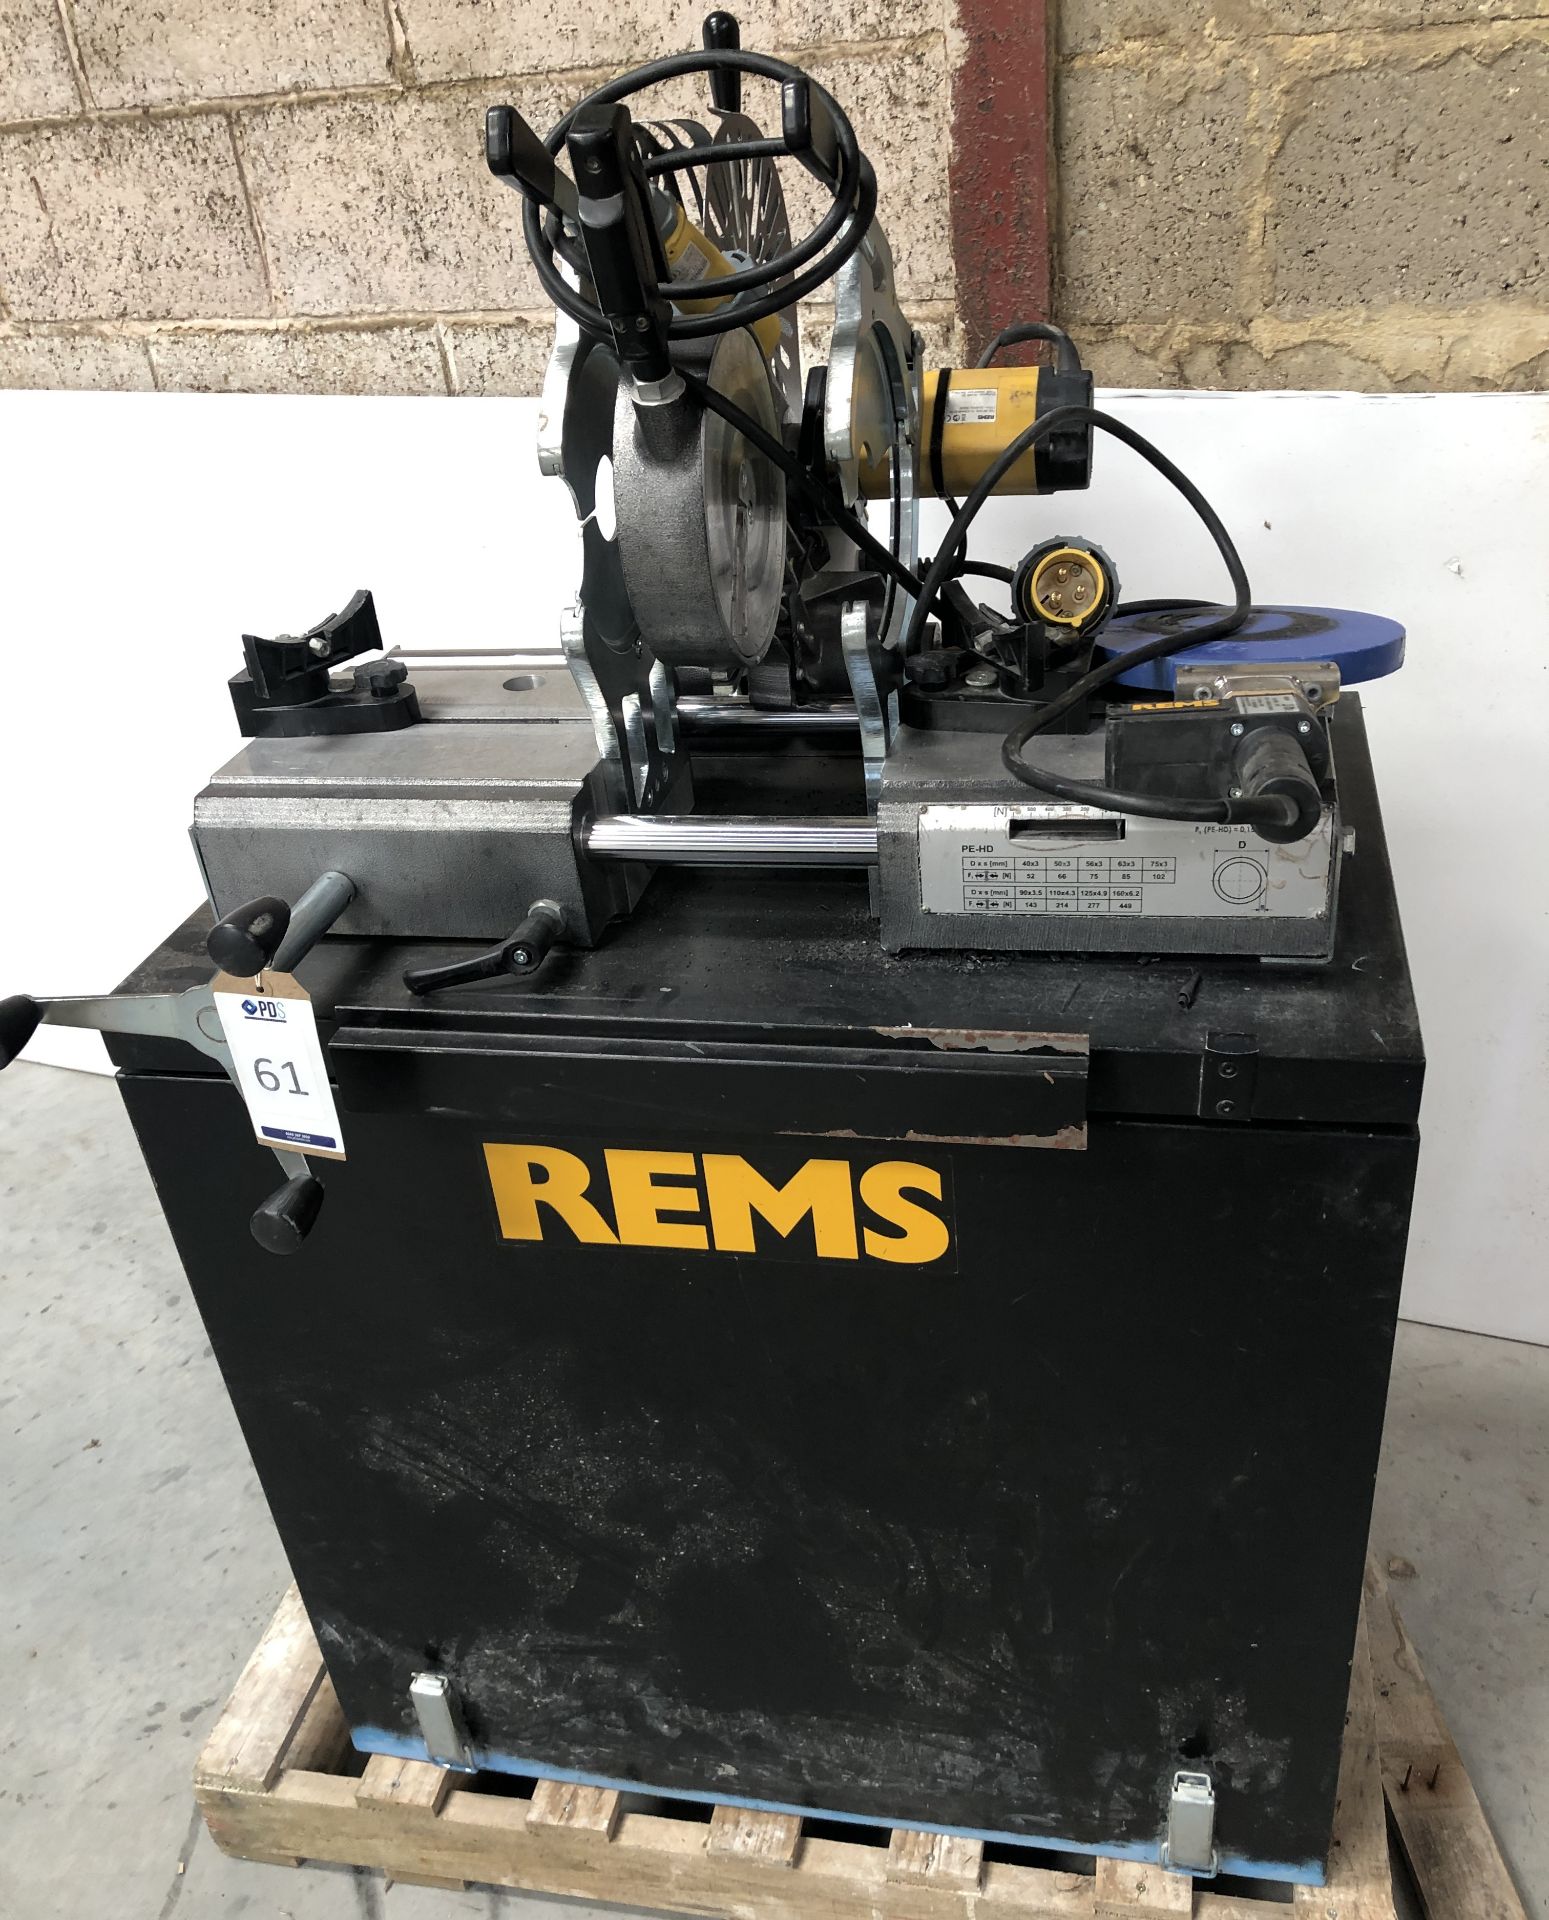 REMS 252046 Plastic Pipe Butt Fusion Welder (2019) Serial Number 191500149 on Cabinet/Stand (